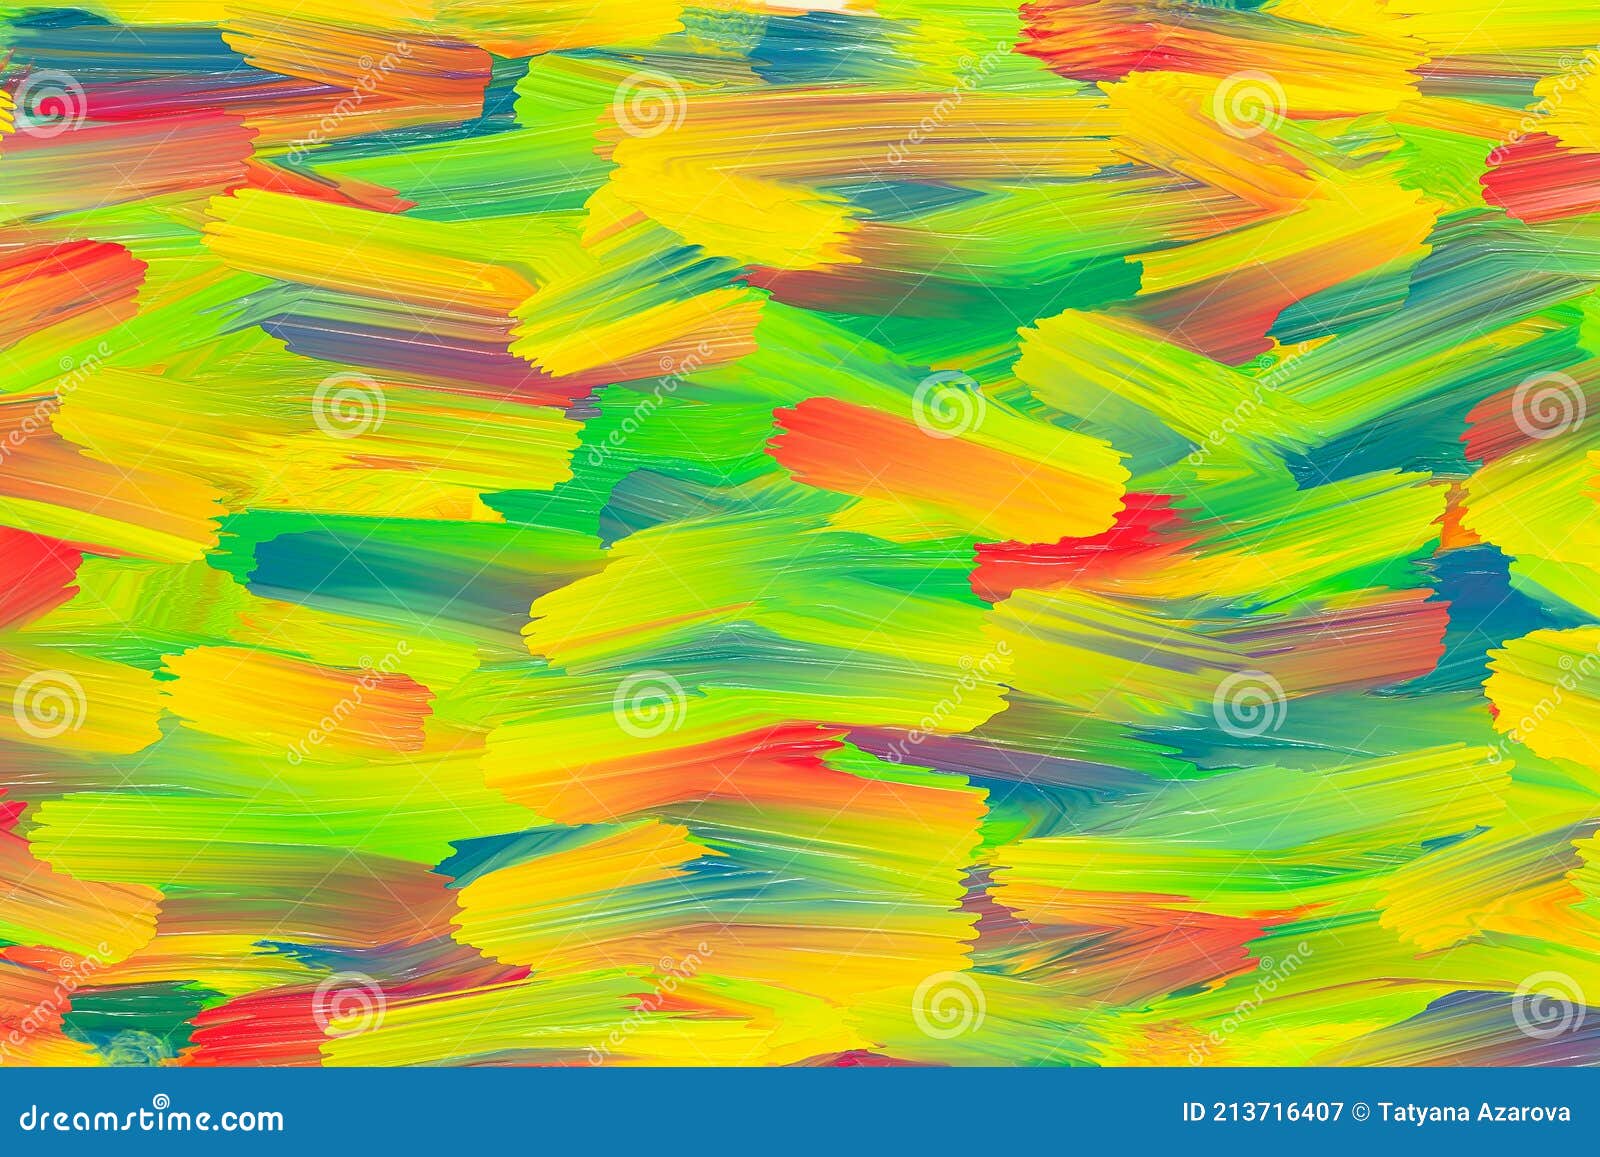 HD wallpaper color colors background pattern candy fun random  excitement  Wallpaper Flare